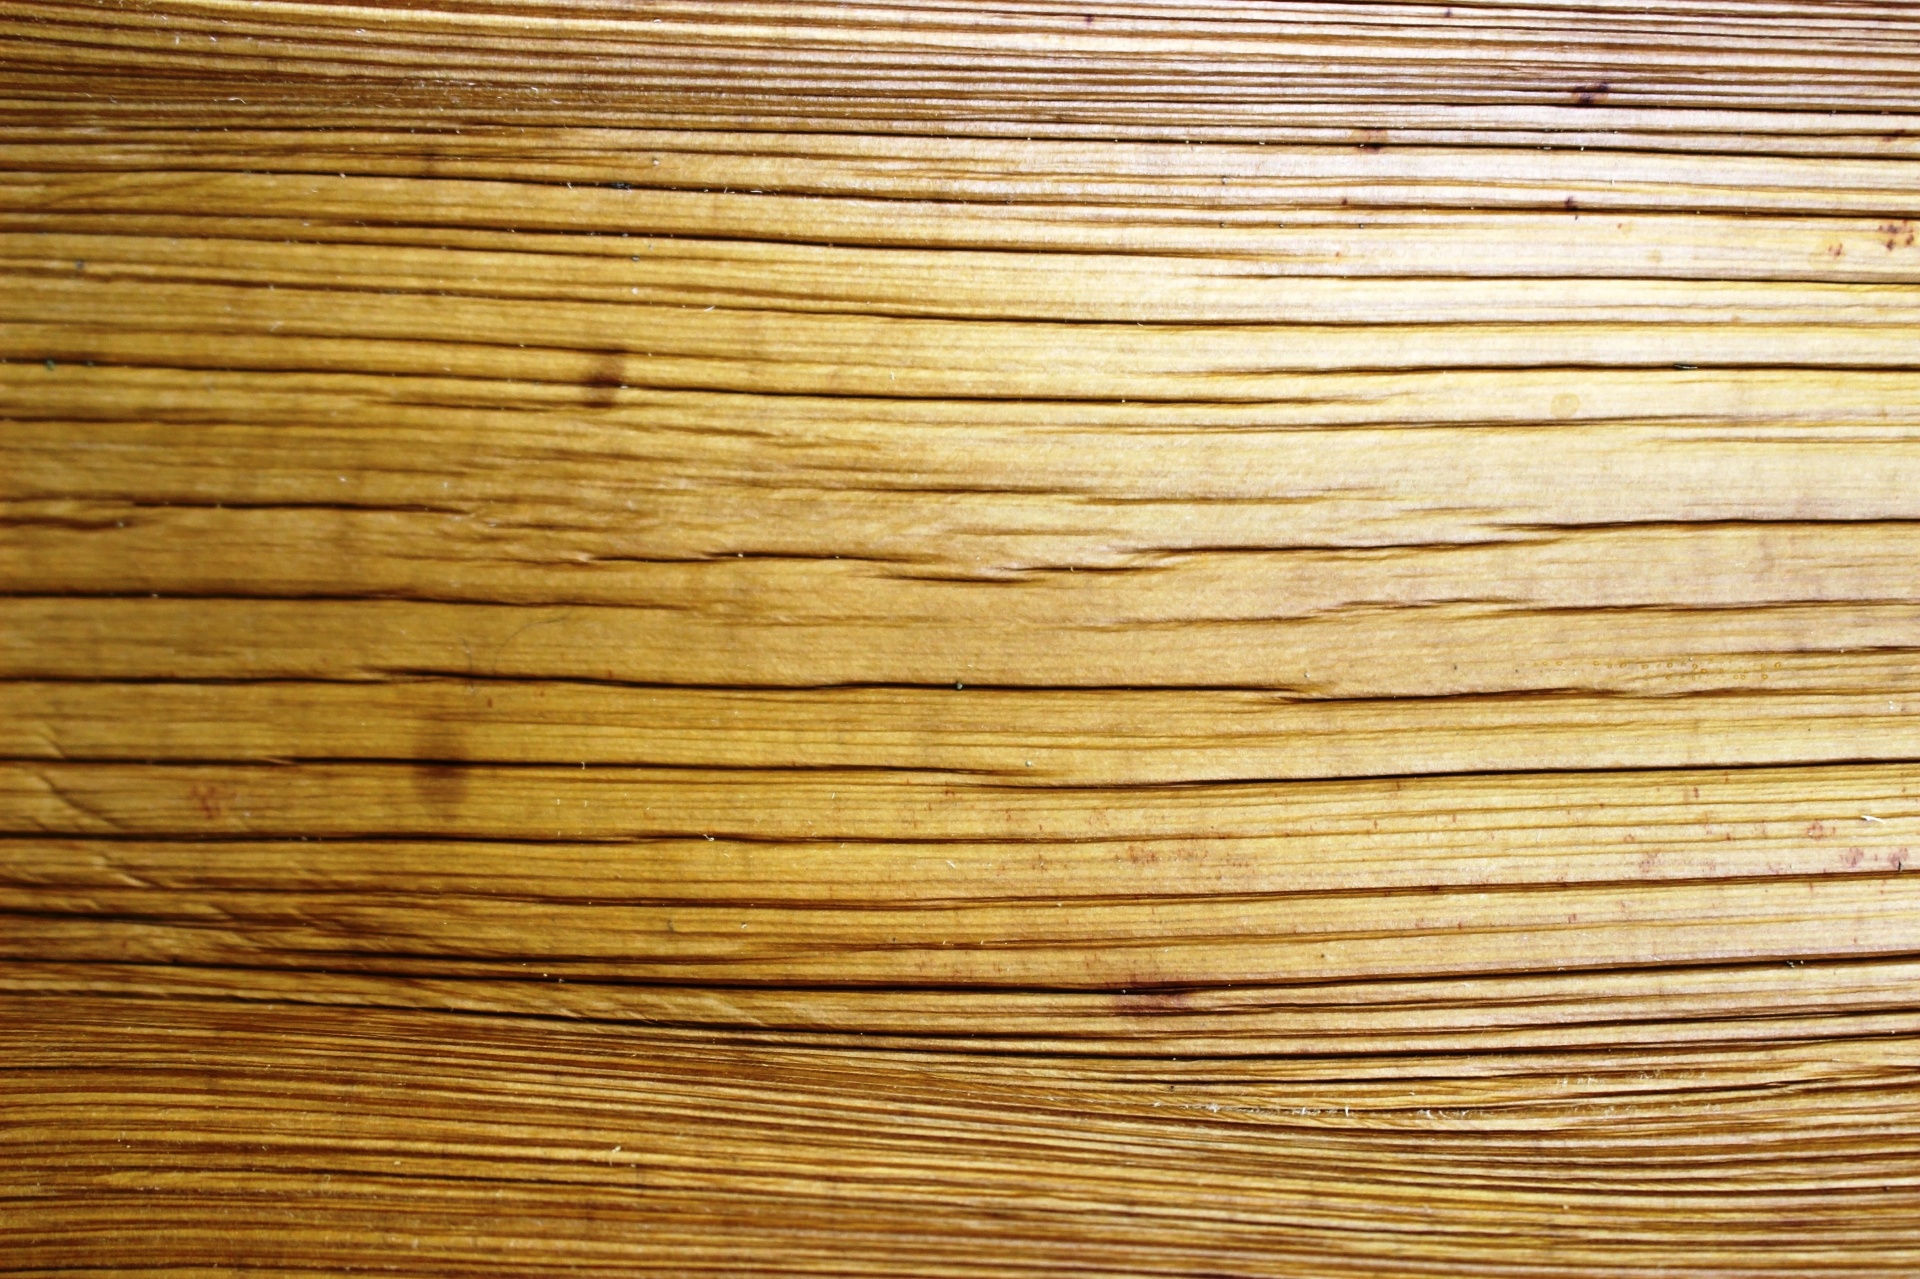 Golden Brown Wood Texture Background with Horizontal Grain Lines